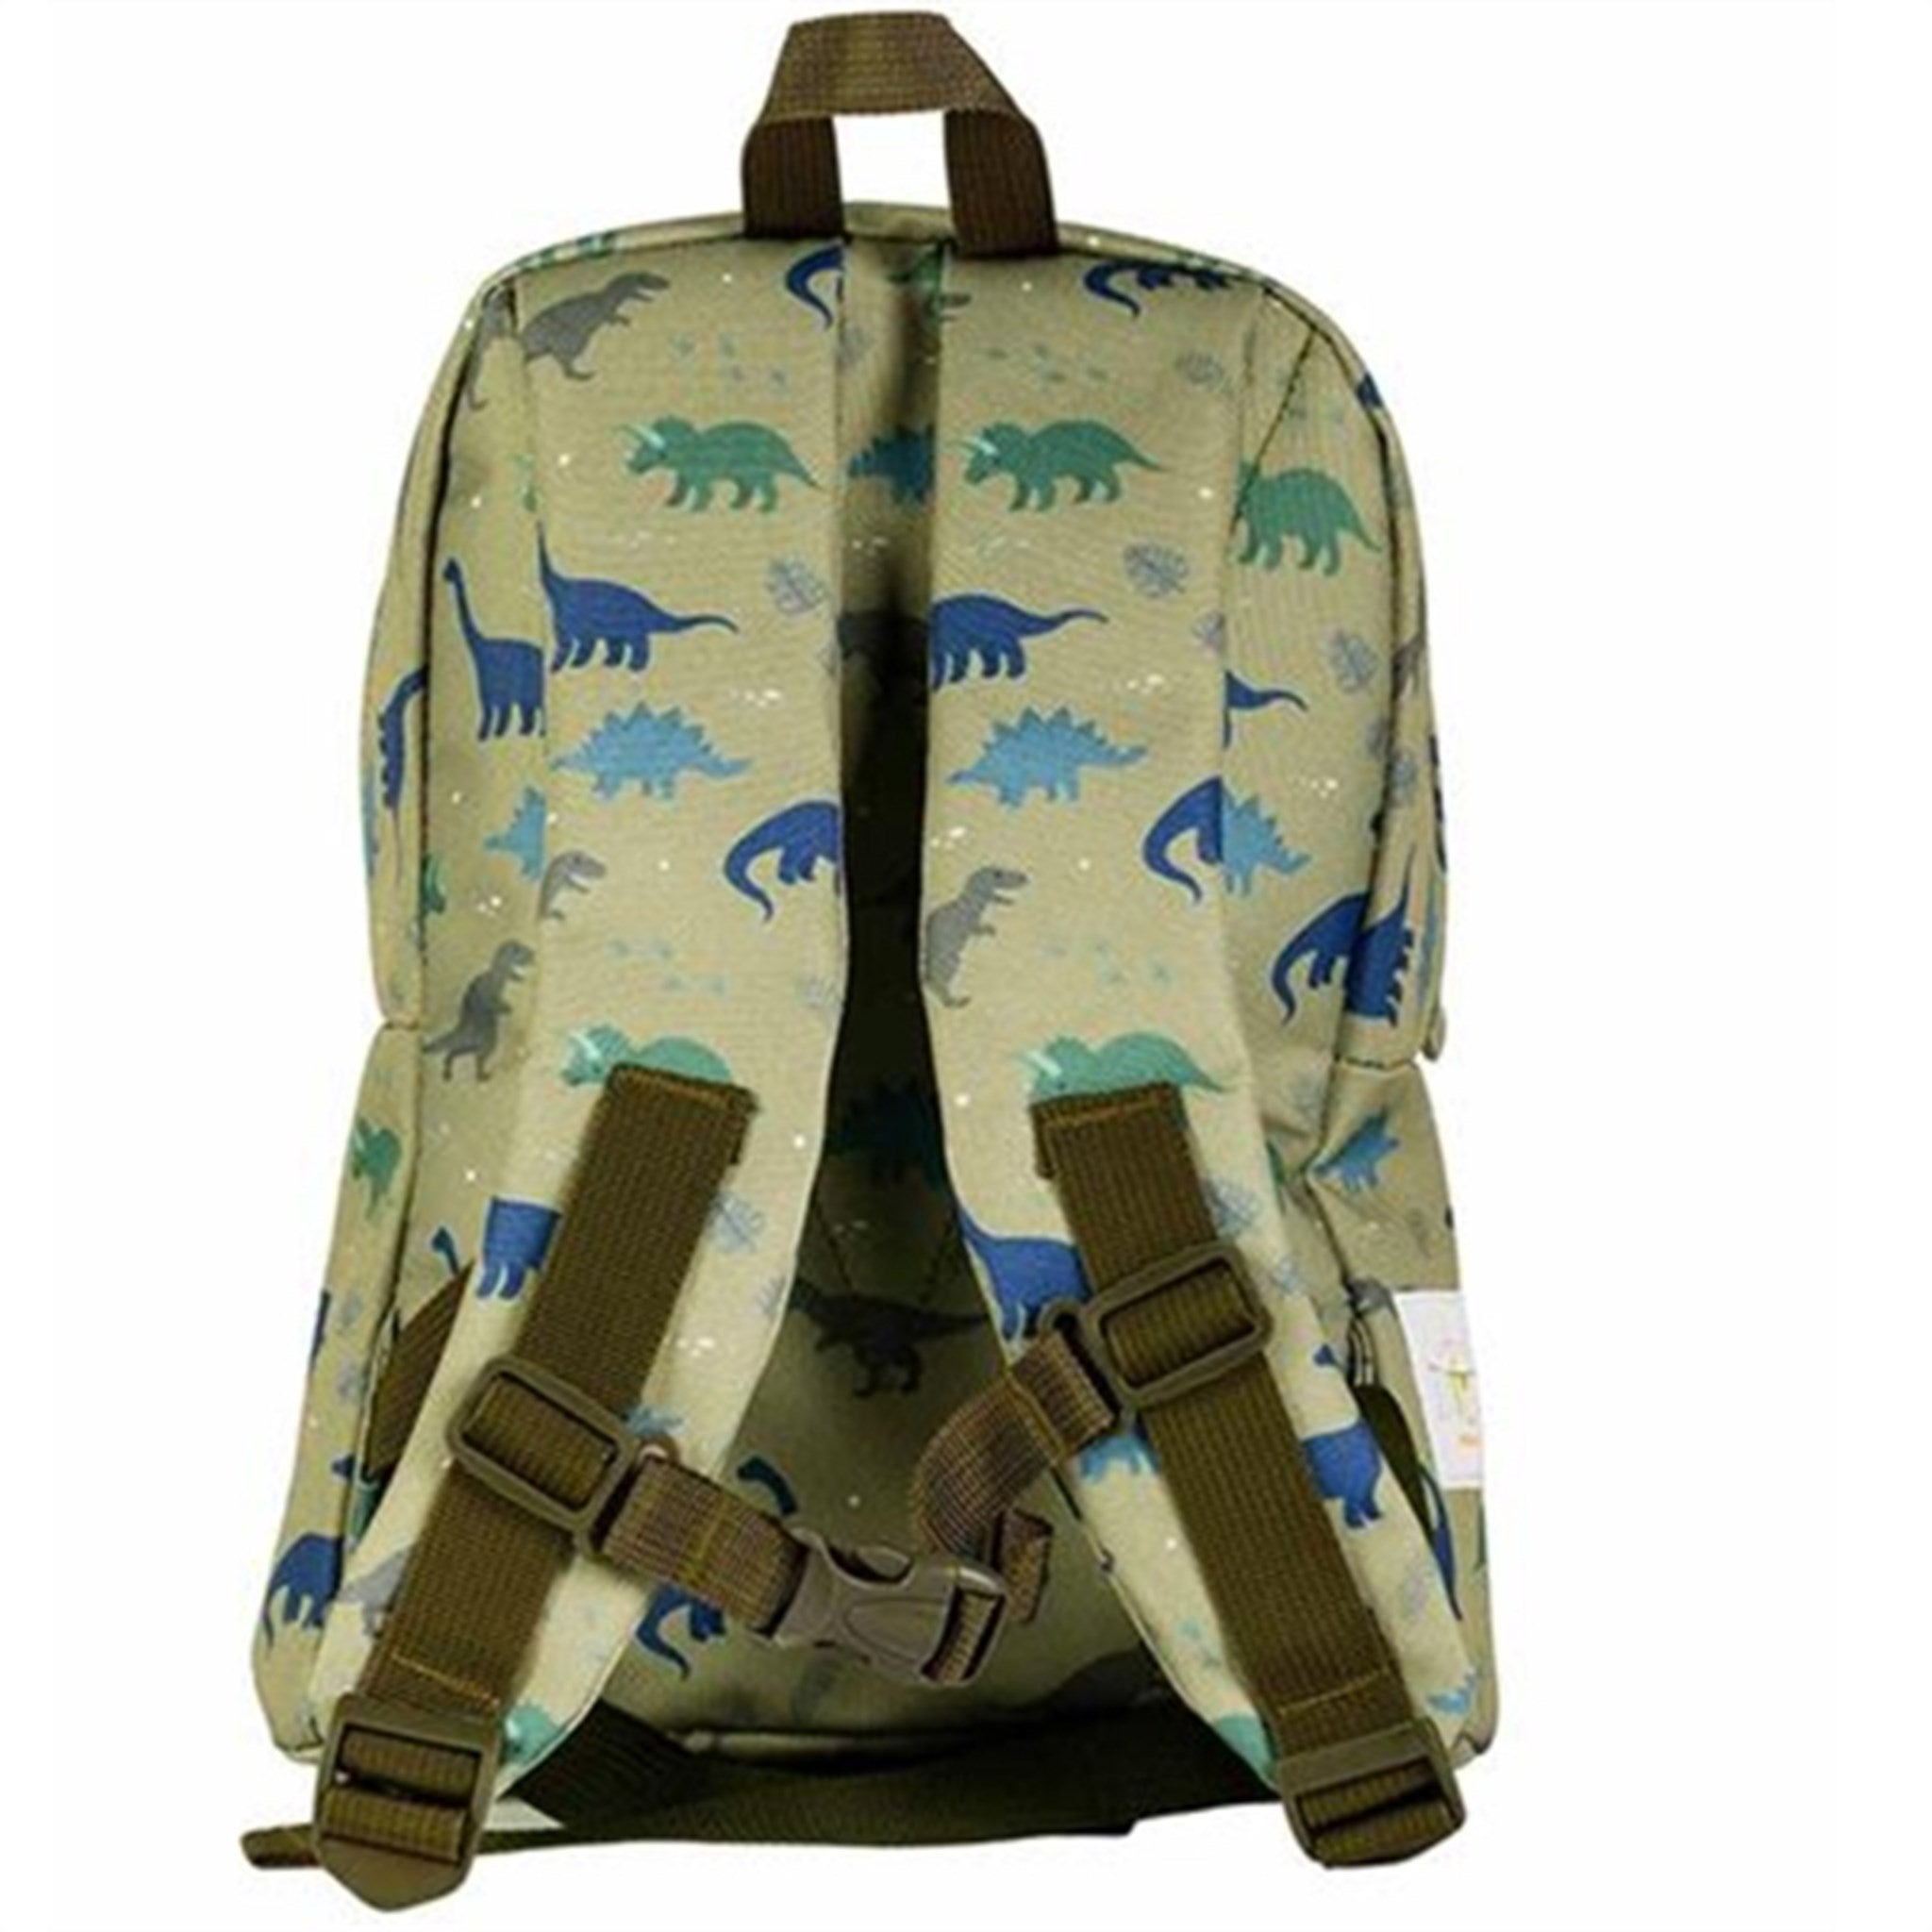 A Little Lovely Company Backpack Small Dinosaur 6